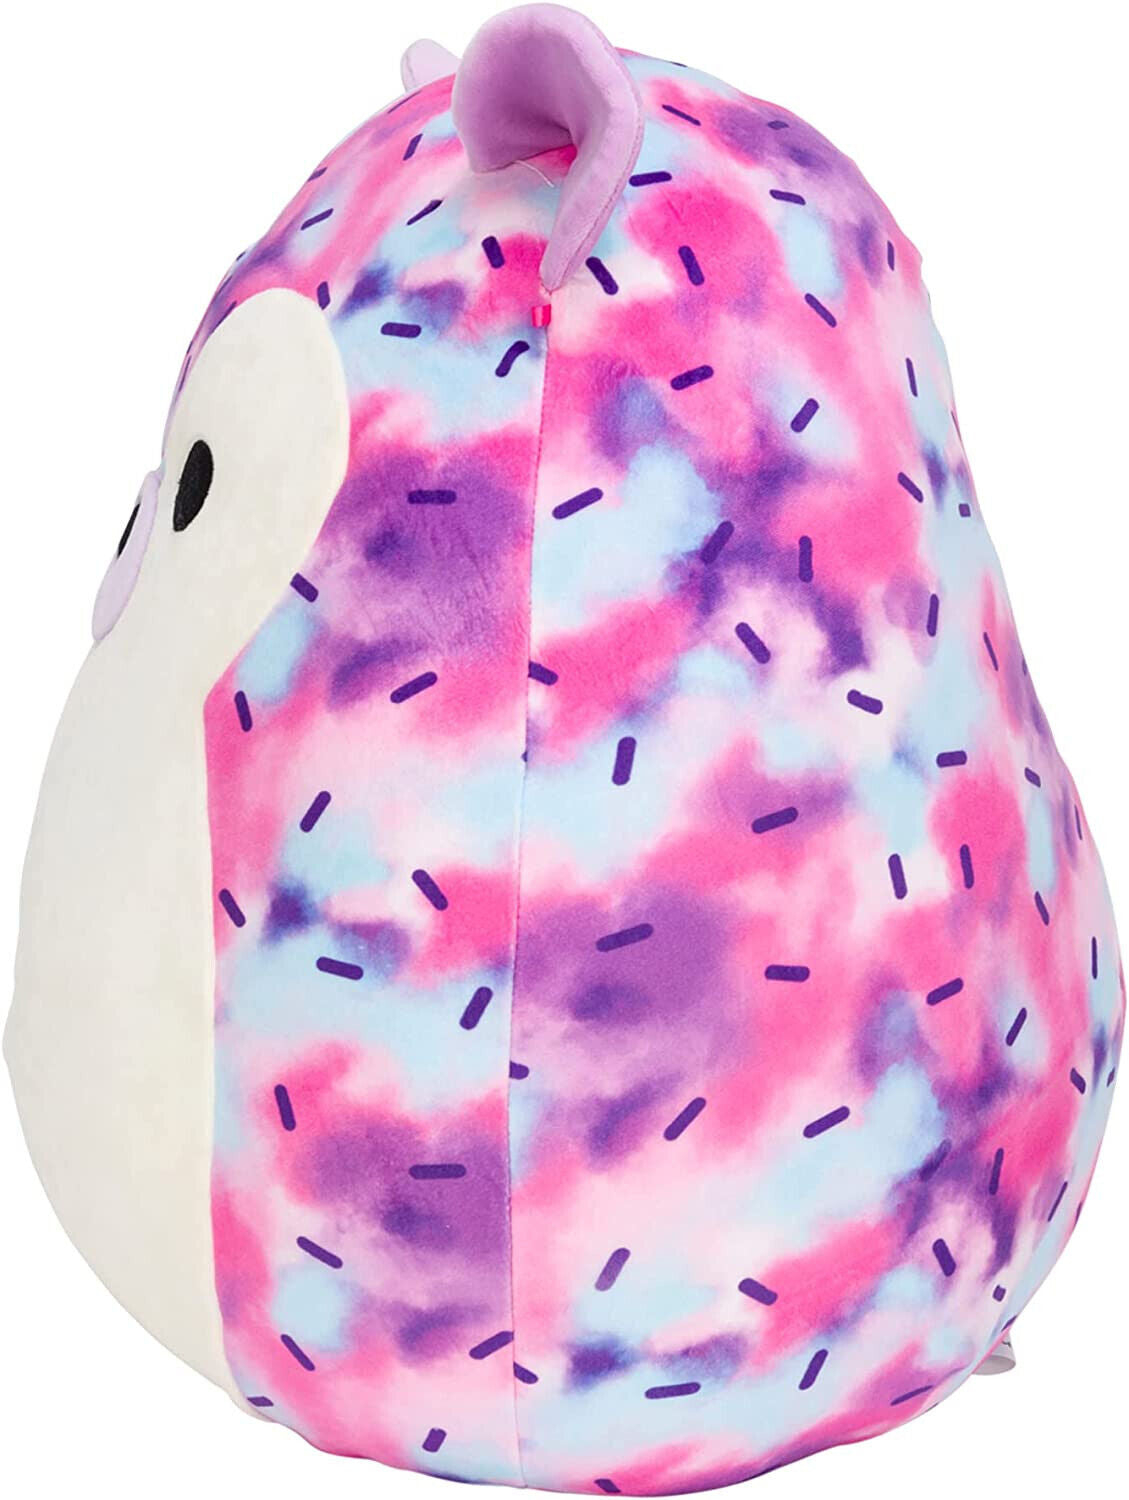 "MUST HAVE Squishmallows 12" Collectable Character Plush - Soft & Cuddly"